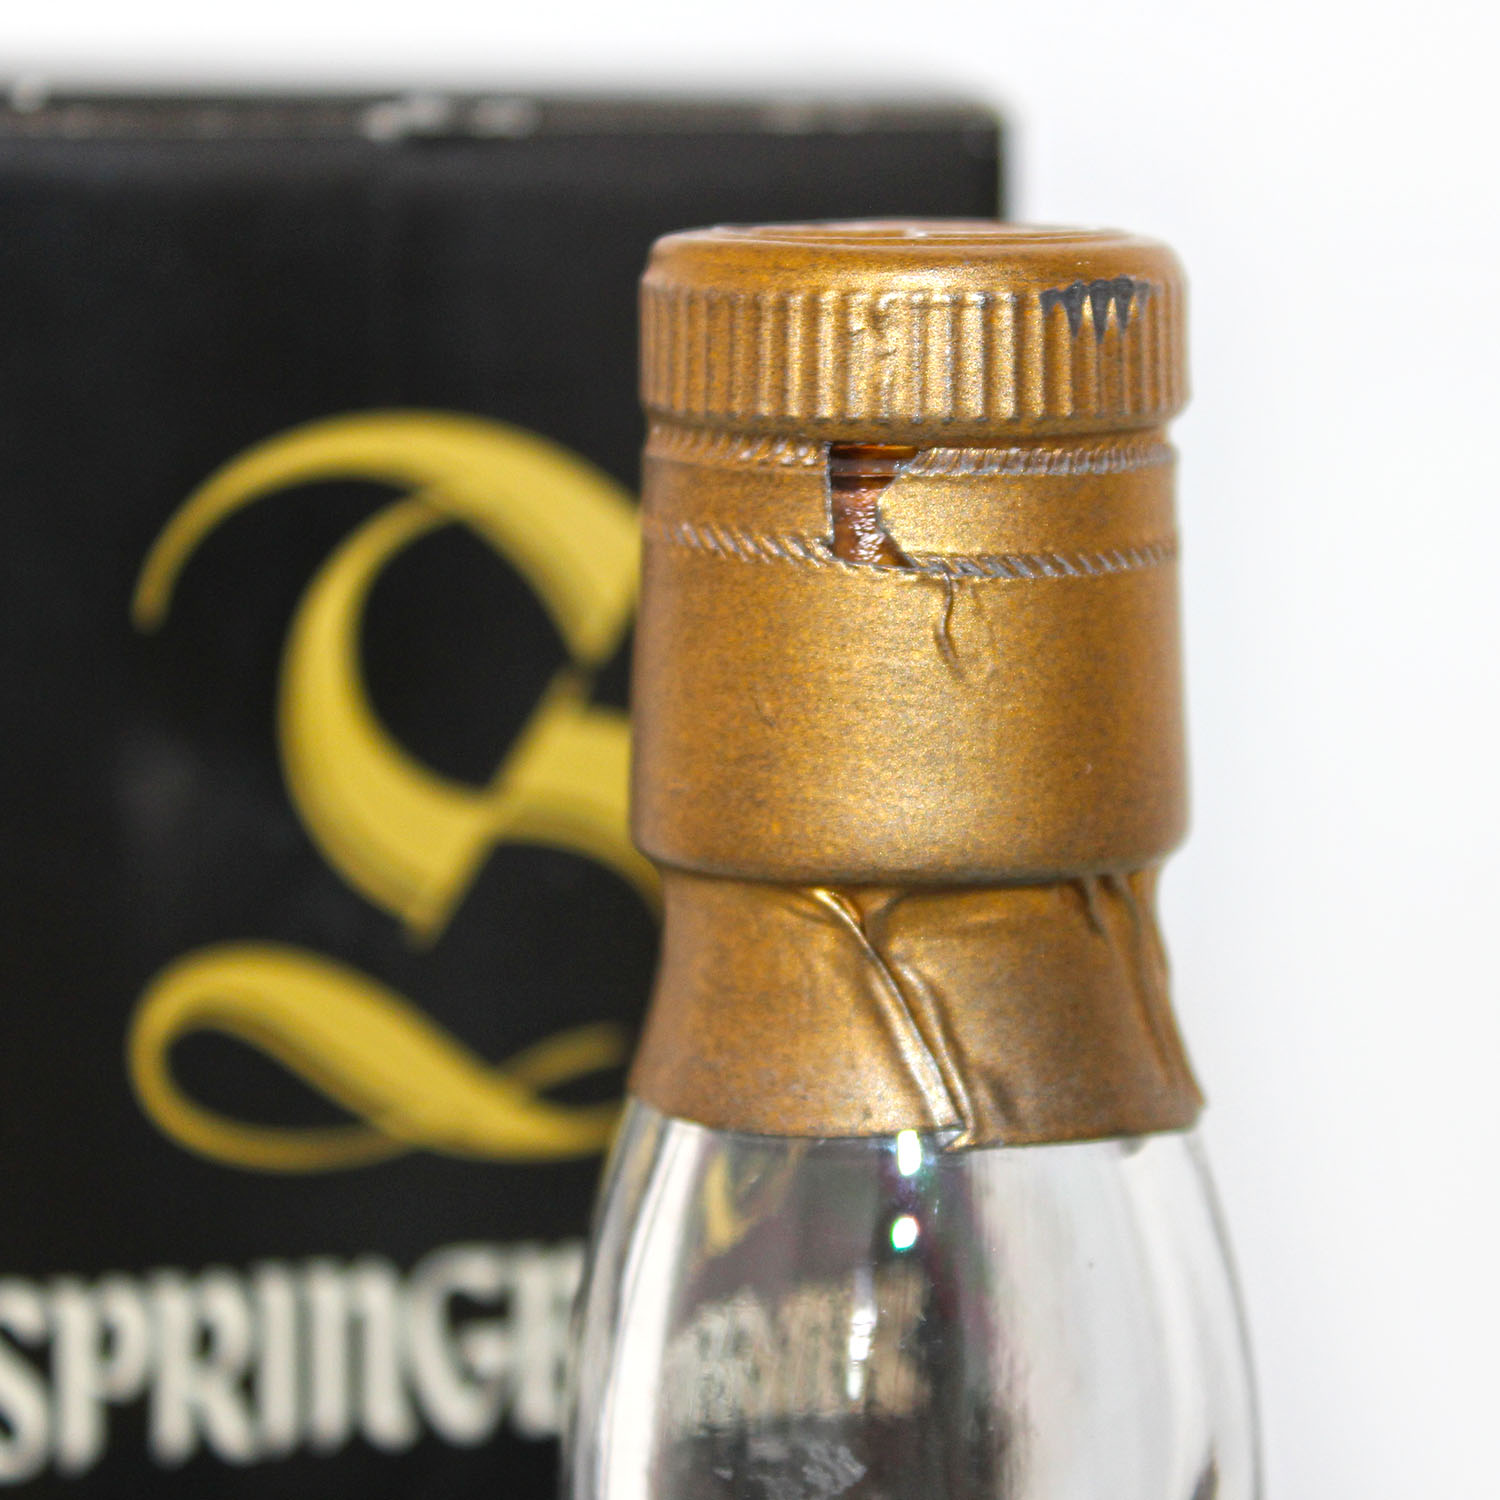 Springbank 12 Year Old Bot 1980s capsule side